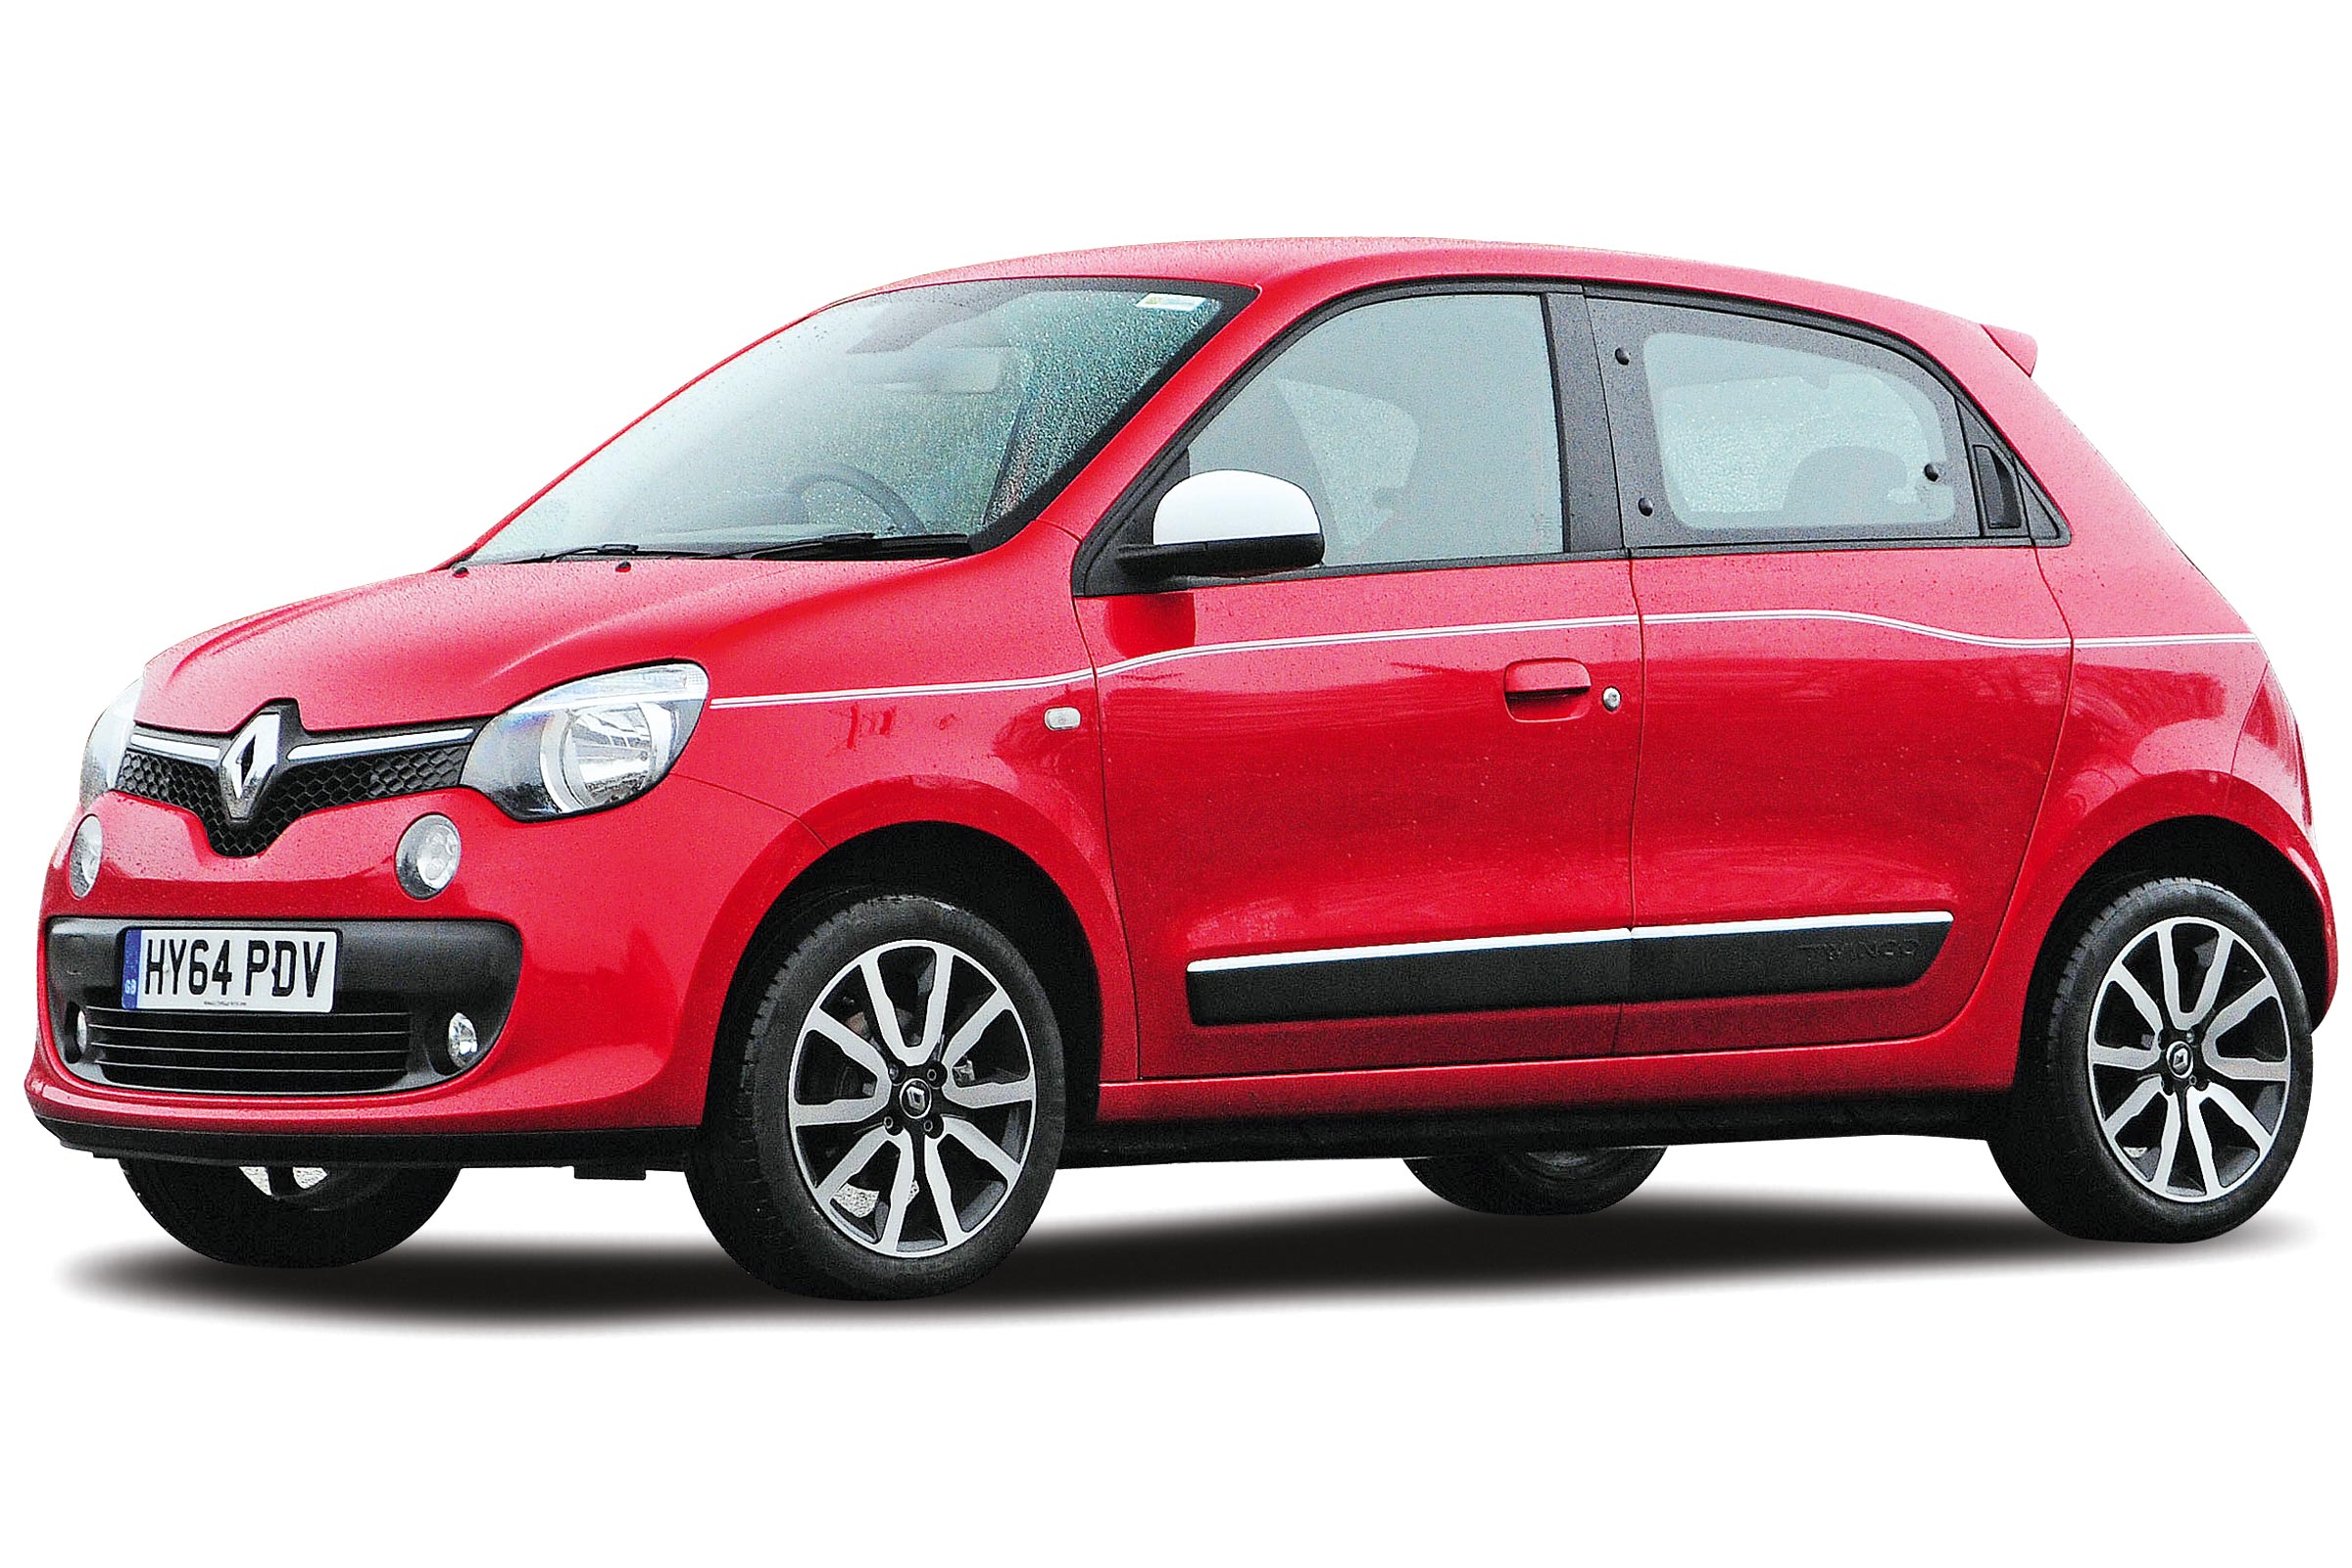 Renault Twingo (2007-2014) review - CarBuyer 